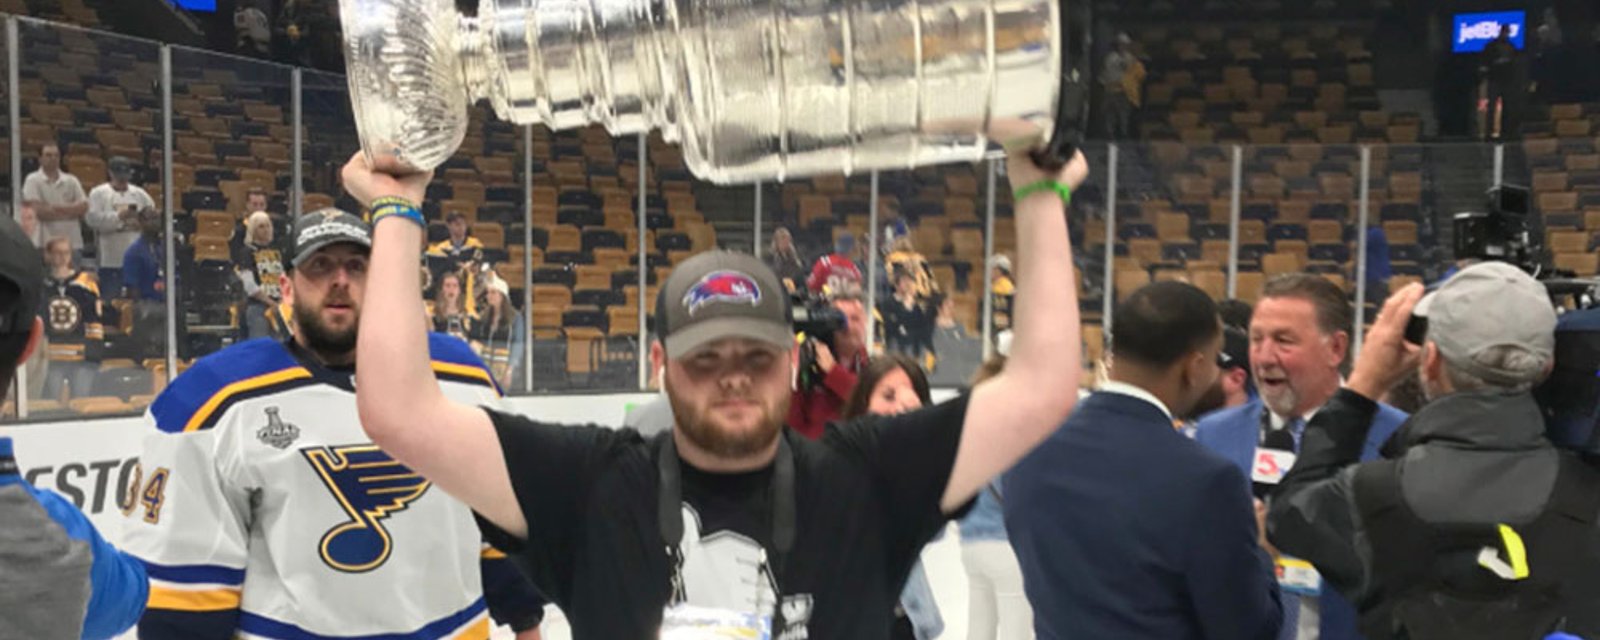 Boston fan sneaks onto the ice after Game 7 and hoists the Cup with the Blues